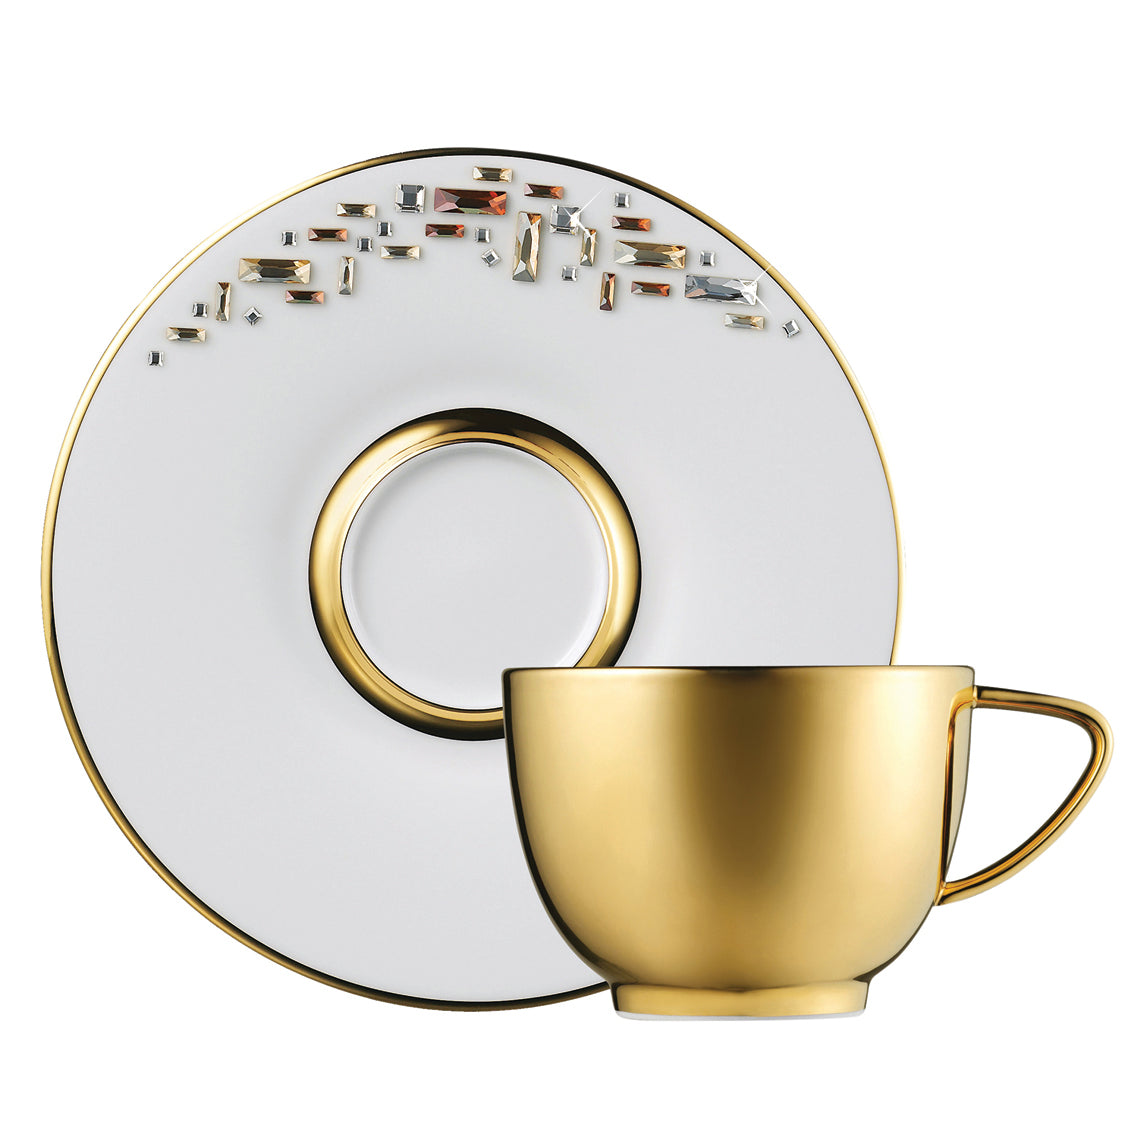 Prouna Diana Gold Cup & Saucer White Background Photo